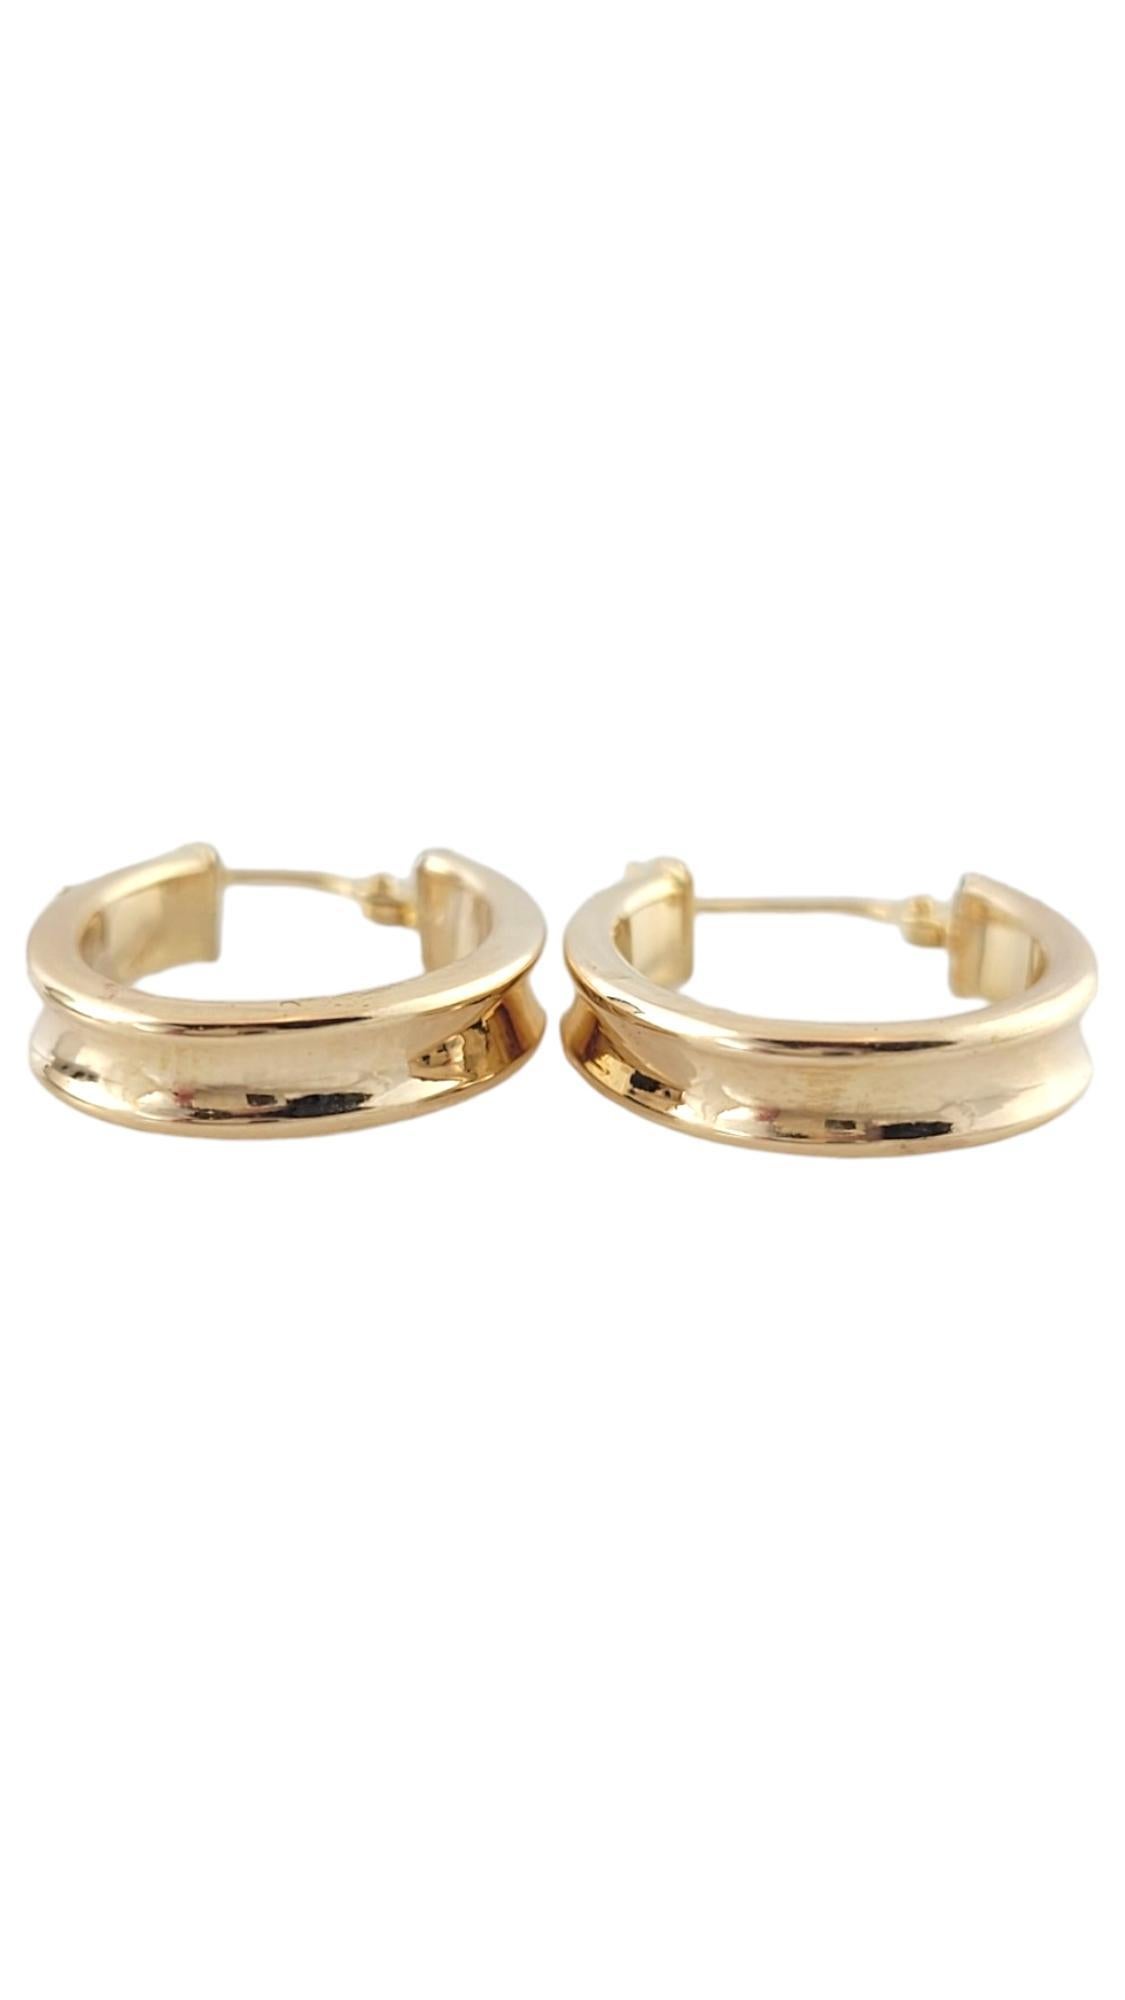 14K Yellow Gold Oval Hoop Earrings

This beautiful set of oval hoop earrings are crafted from 14K yellow gold!

Size: 21.9mm X 3.7mm X 1.8mm

Weight: 1.3 dwt/ 2.1 g

Hallmark: 14KT. Italy

Very good condition, professionally polished.

Will come